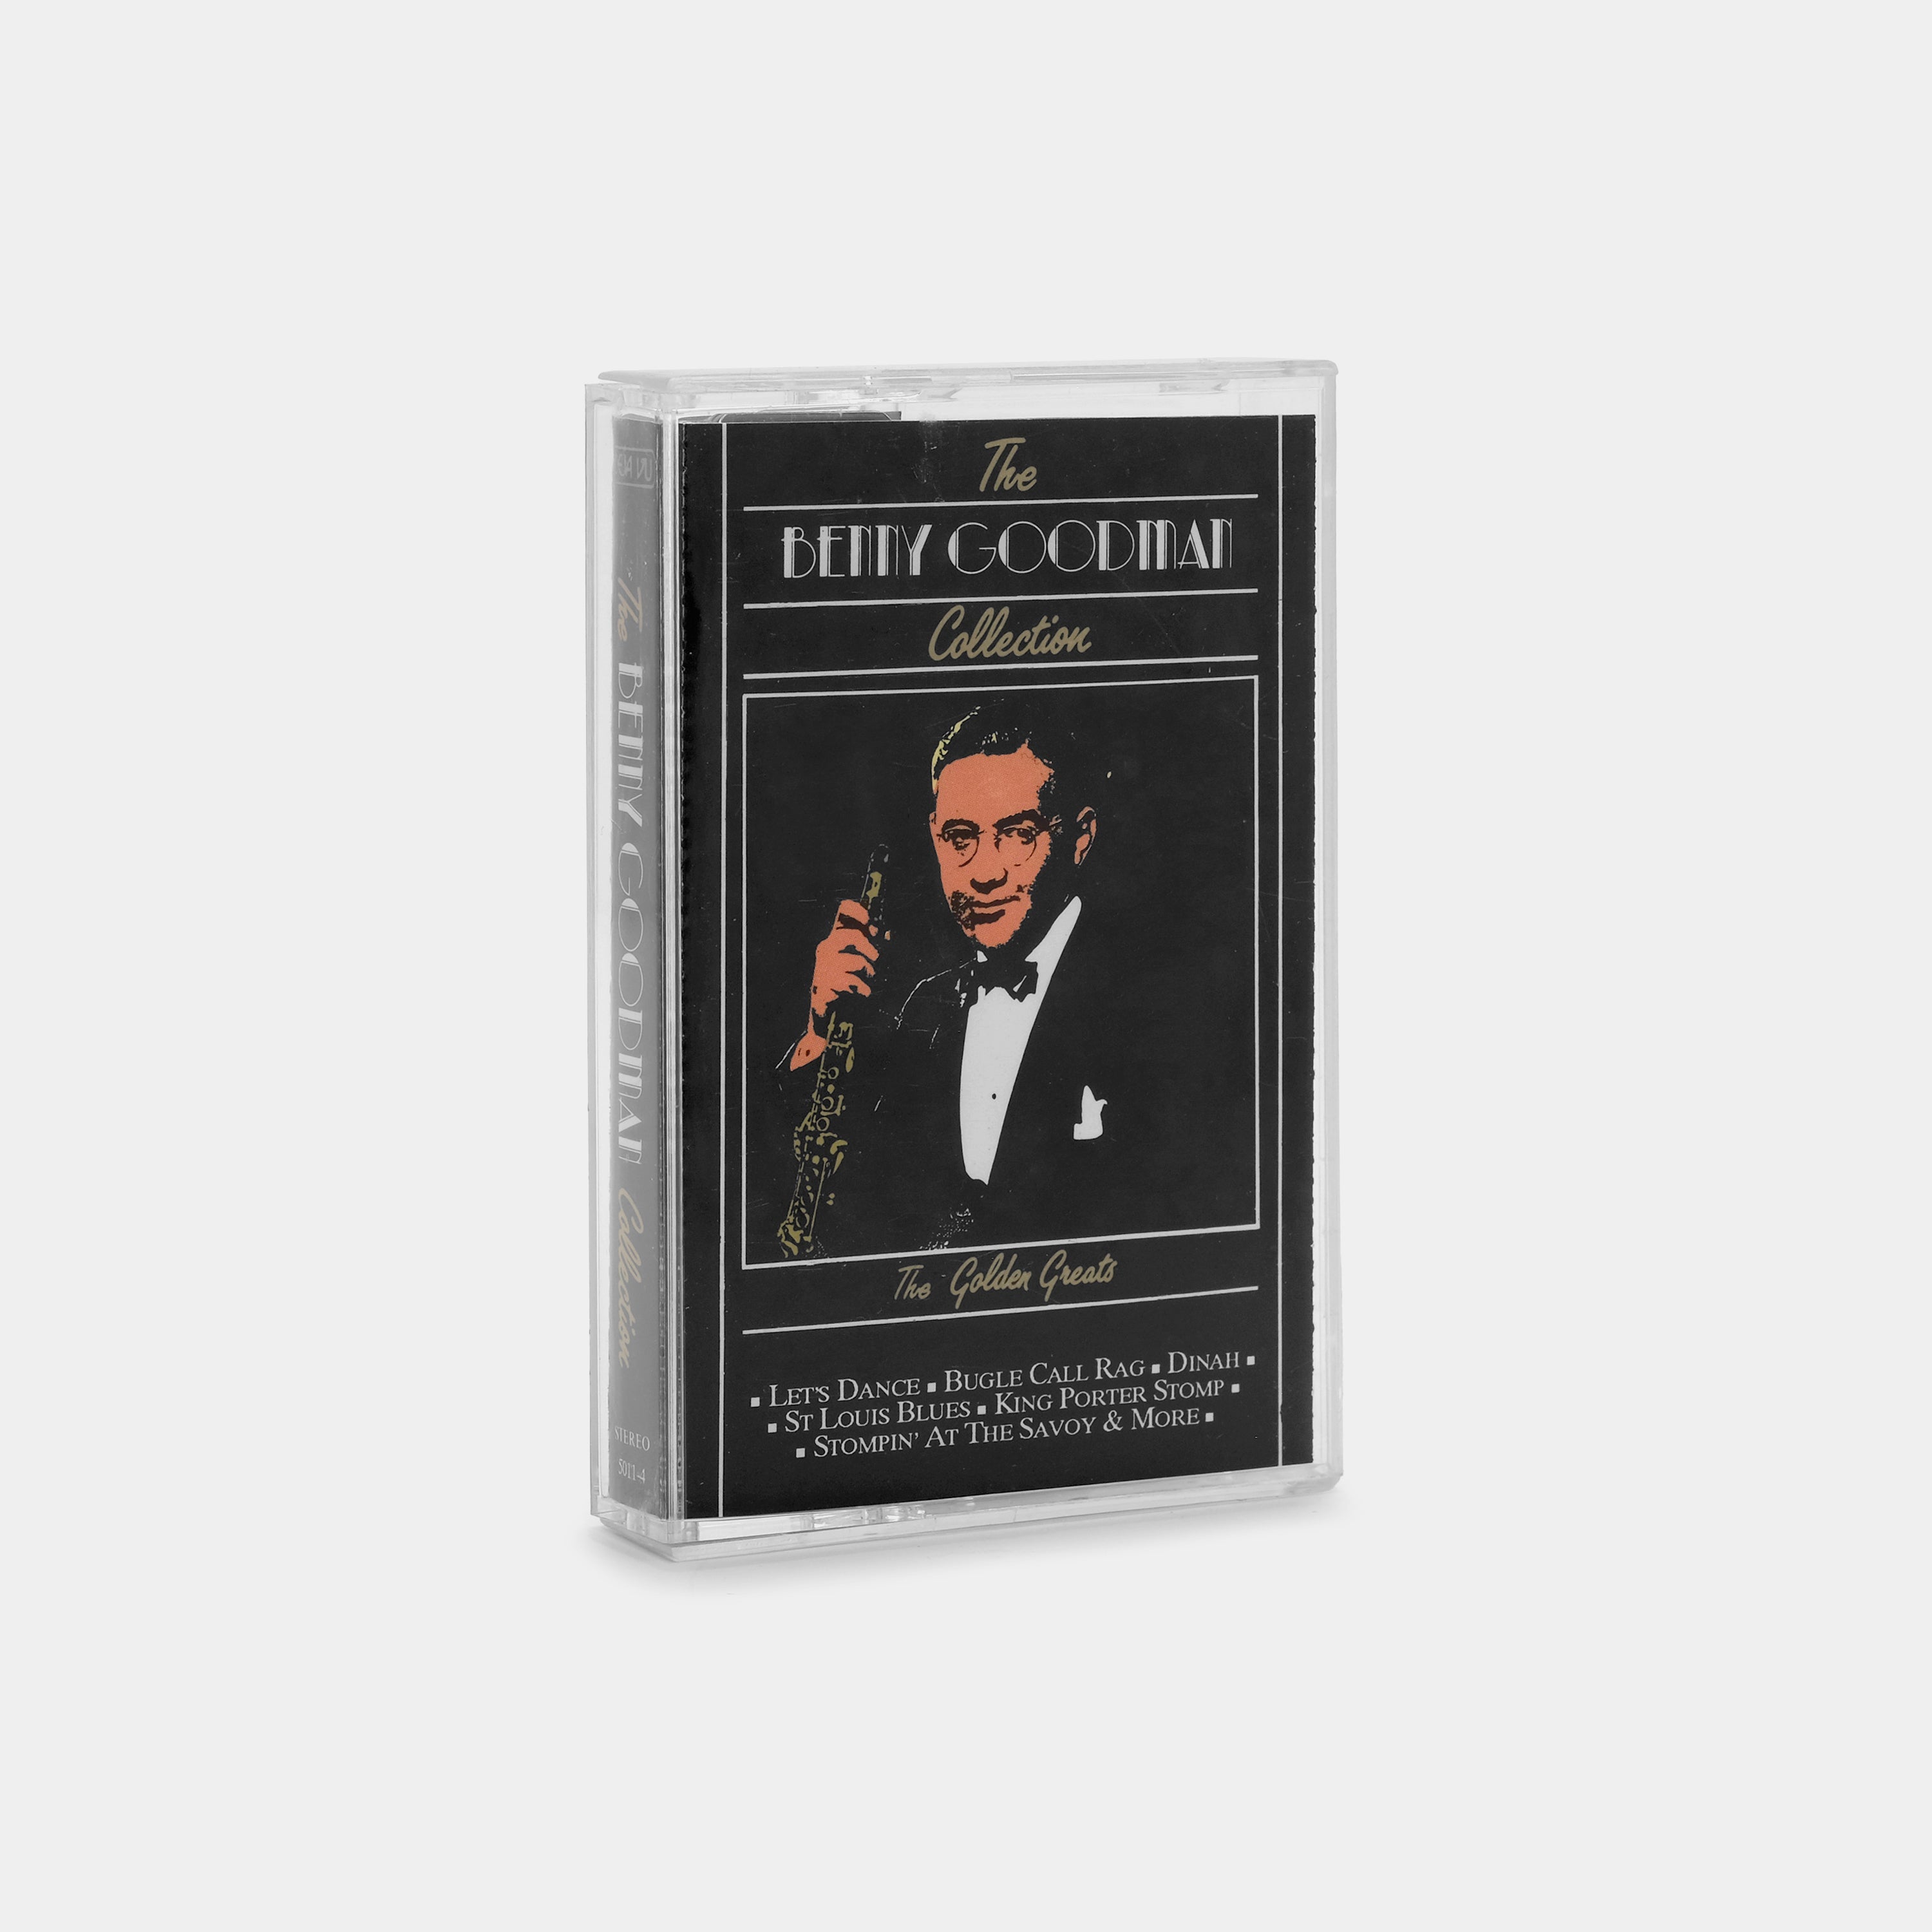 Benny Goodman - The Benny Goodman Collection: The Golden Greats Cassette Tape